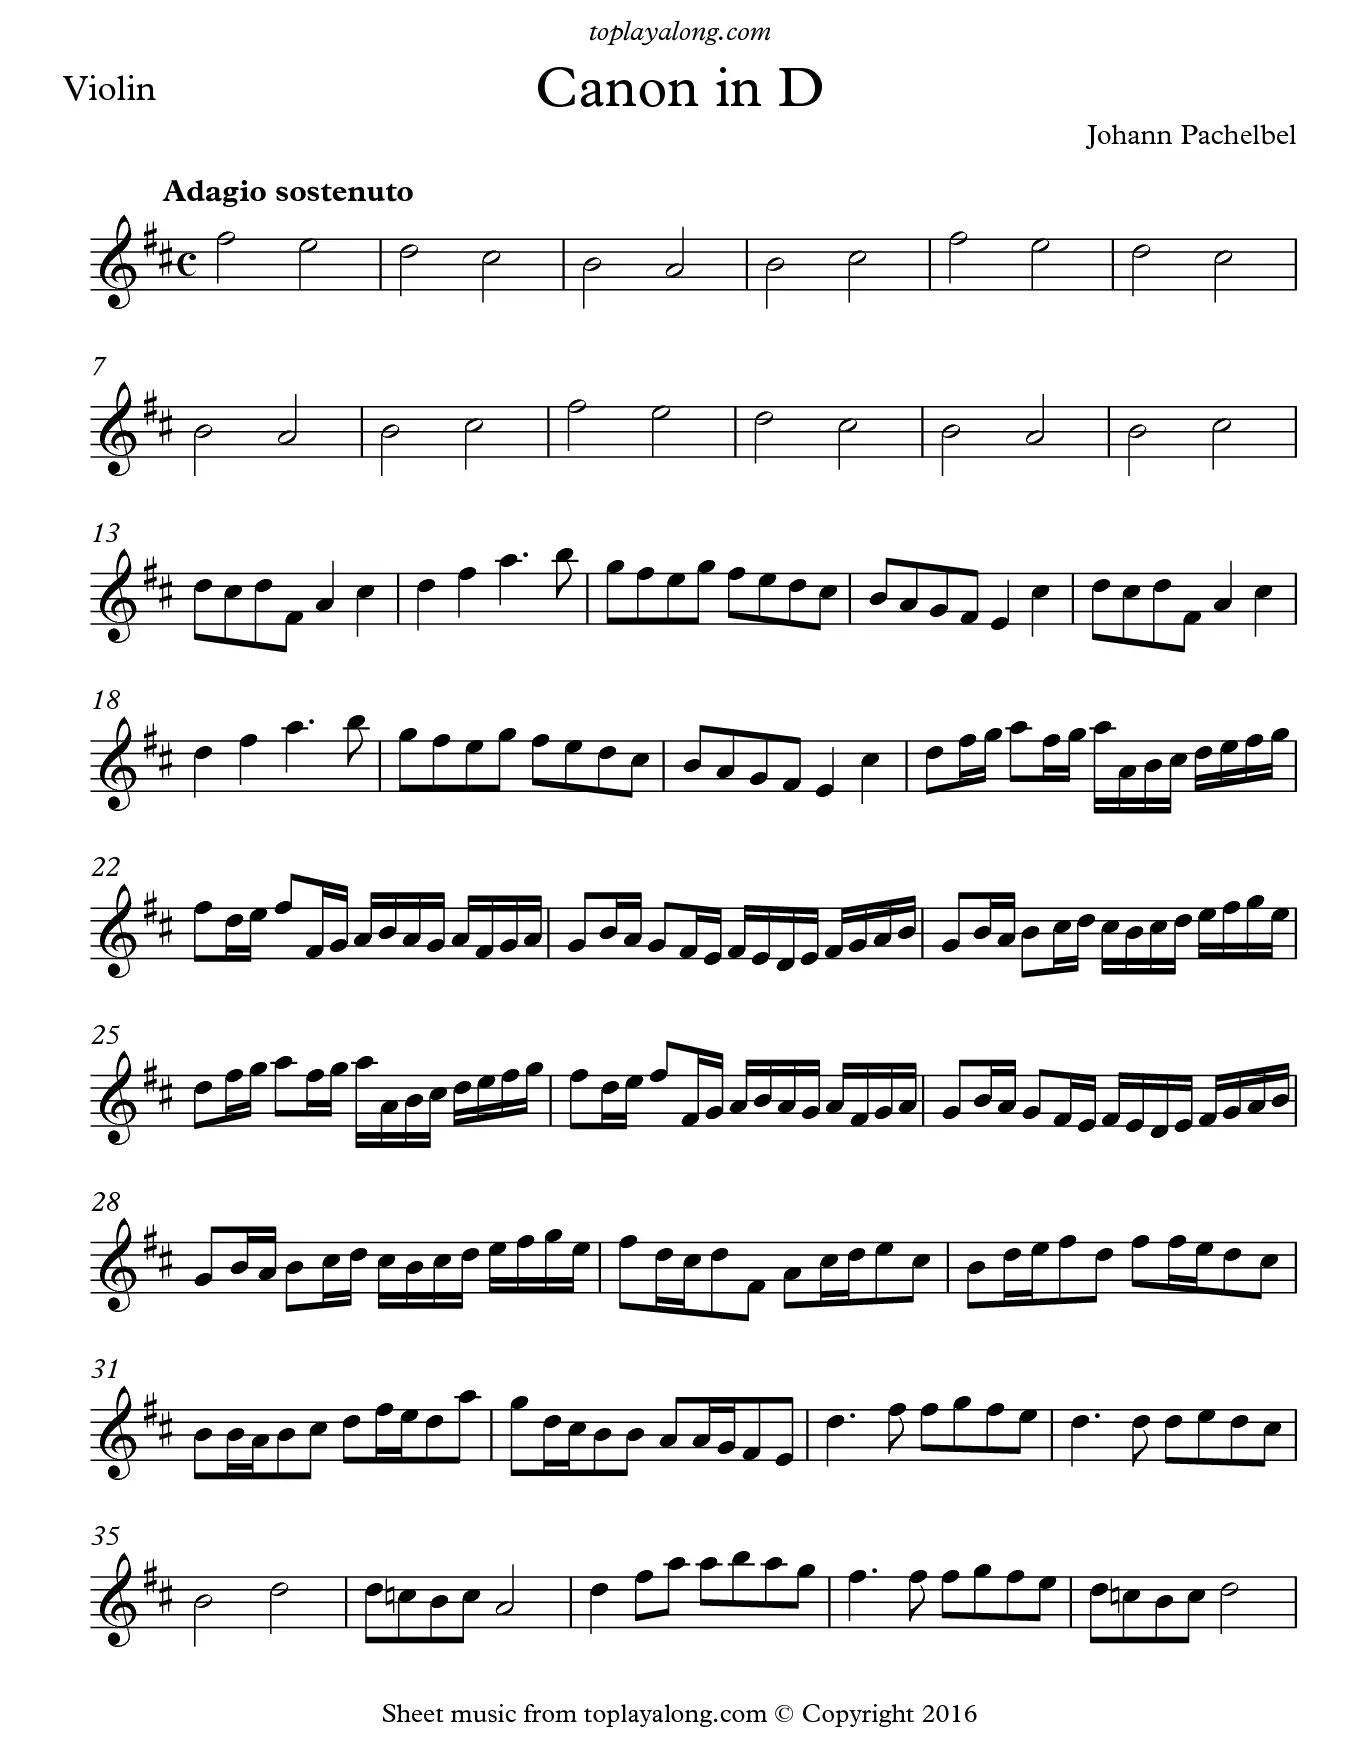 canon in d violin solo - Why is Canon in D so beautiful